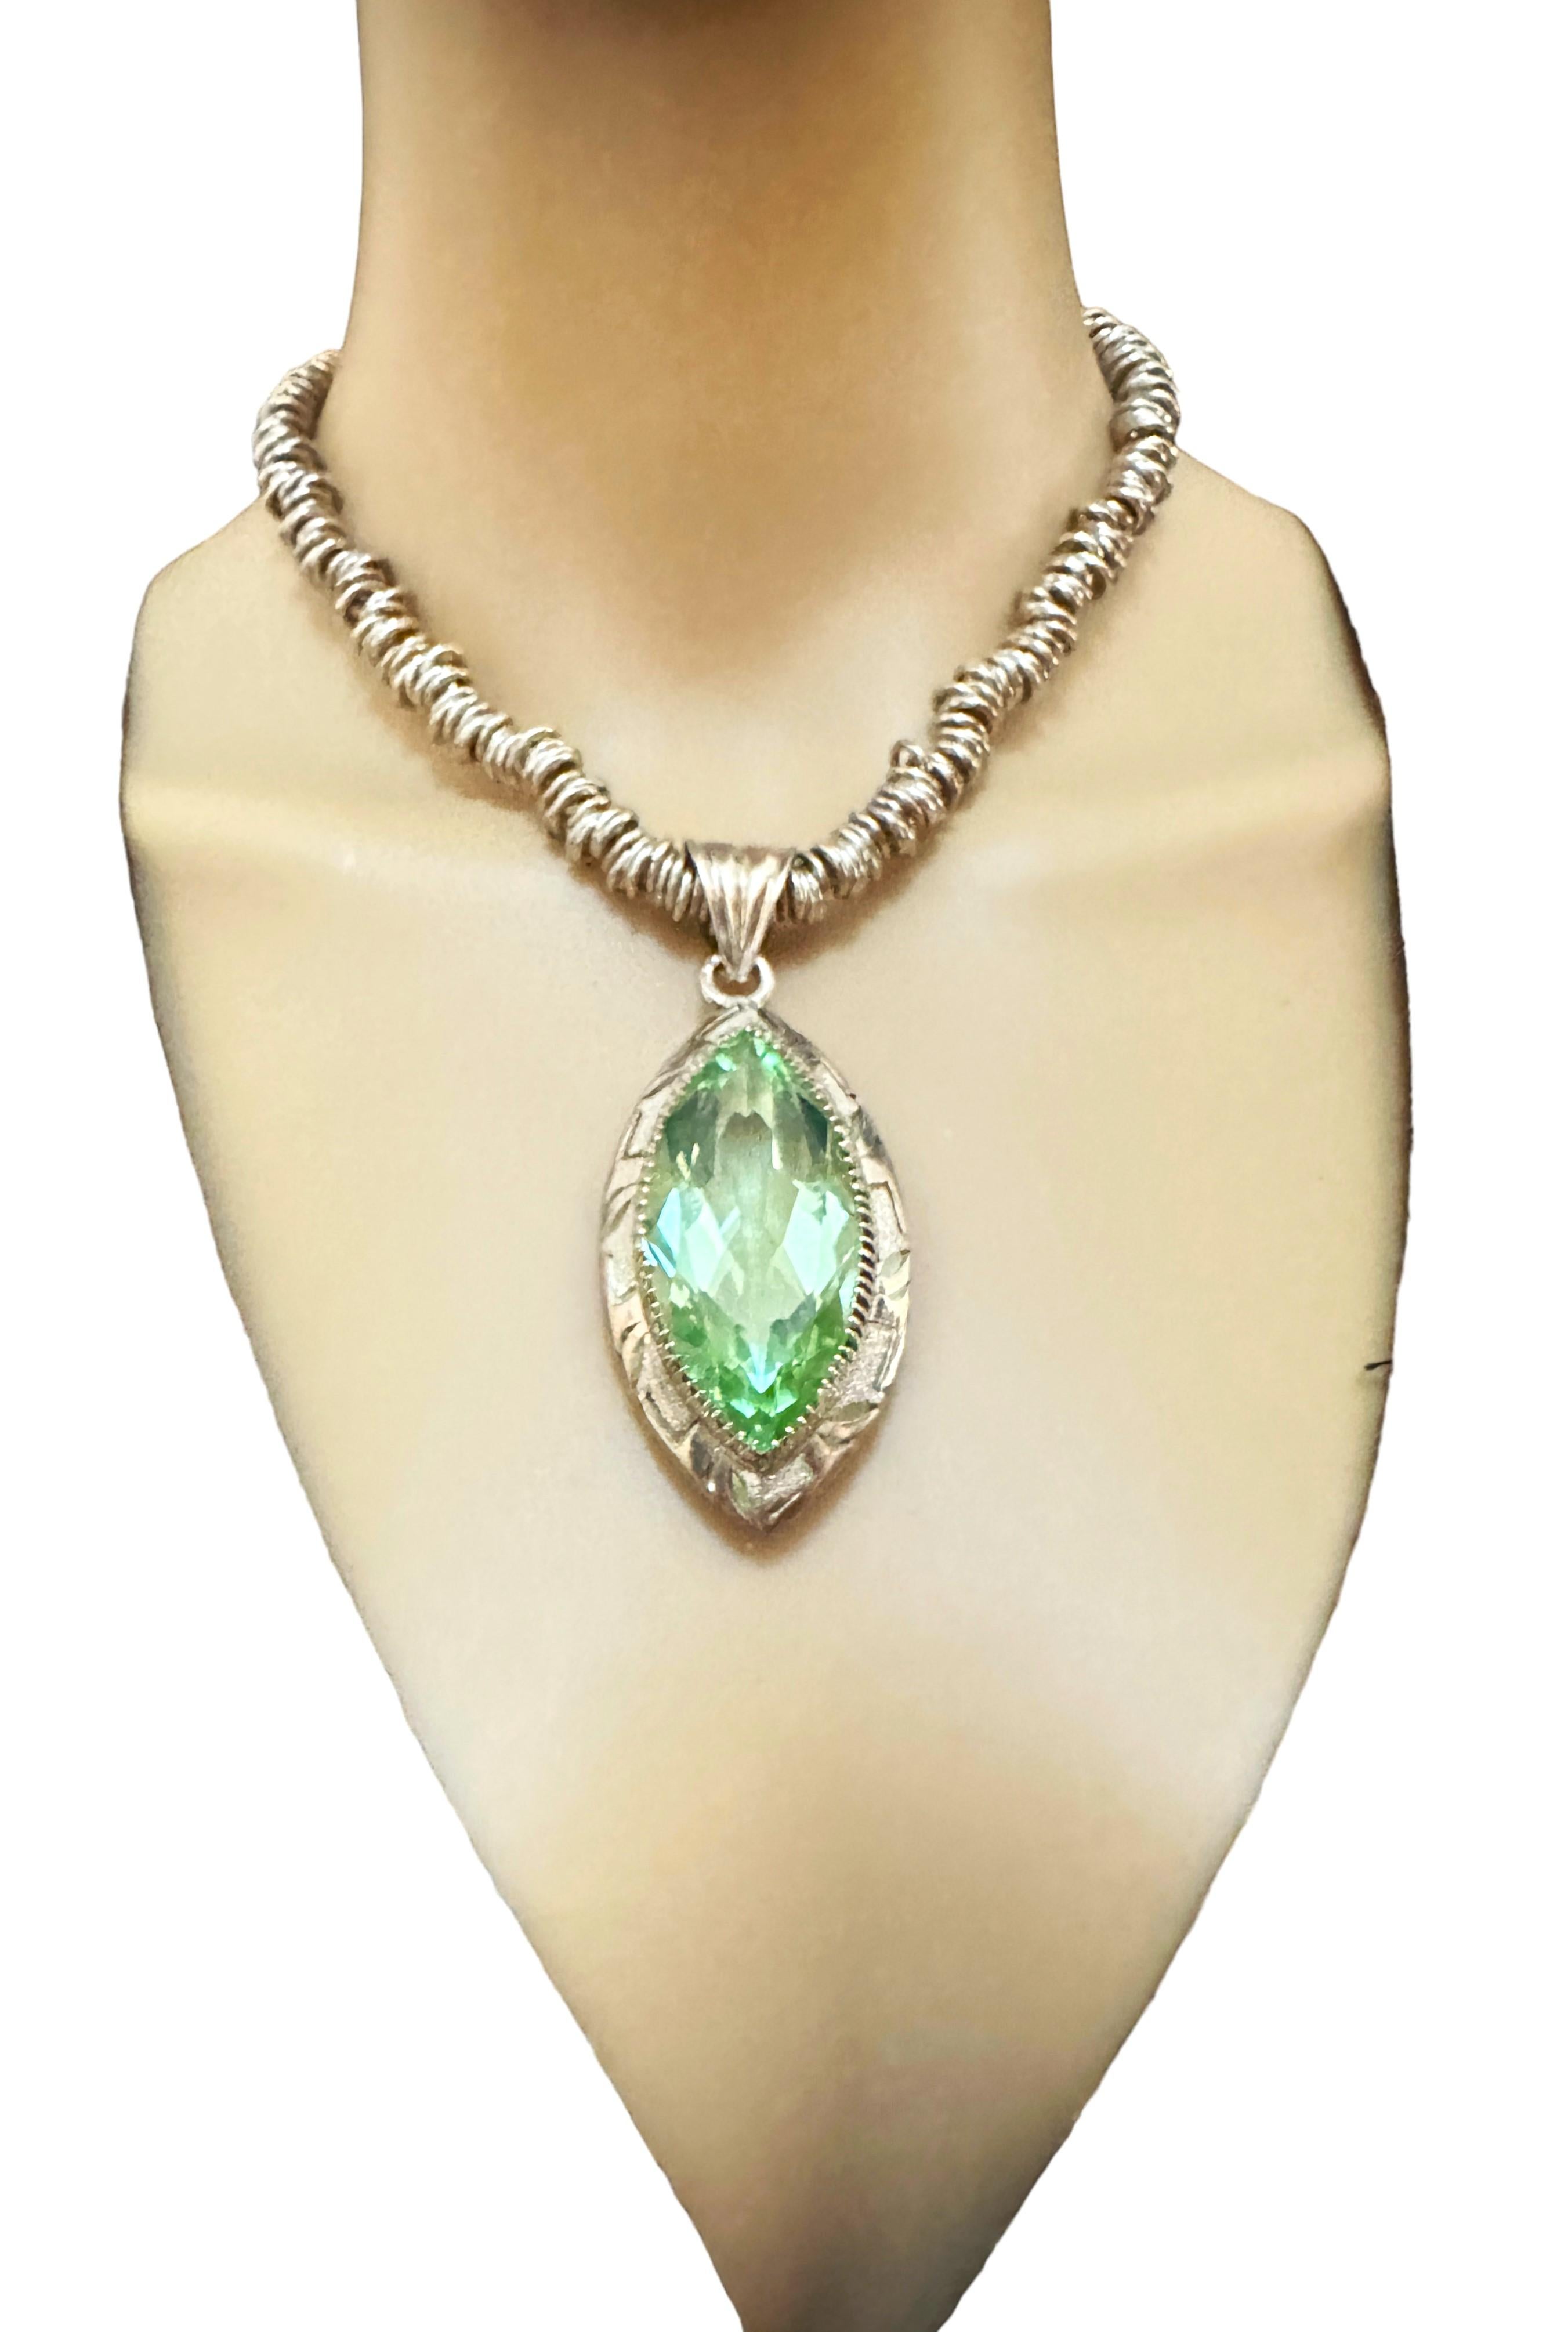 Handmade 16 Inch Ornate Sterling Silver Pendant Necklace with Green Quartz For Sale 6